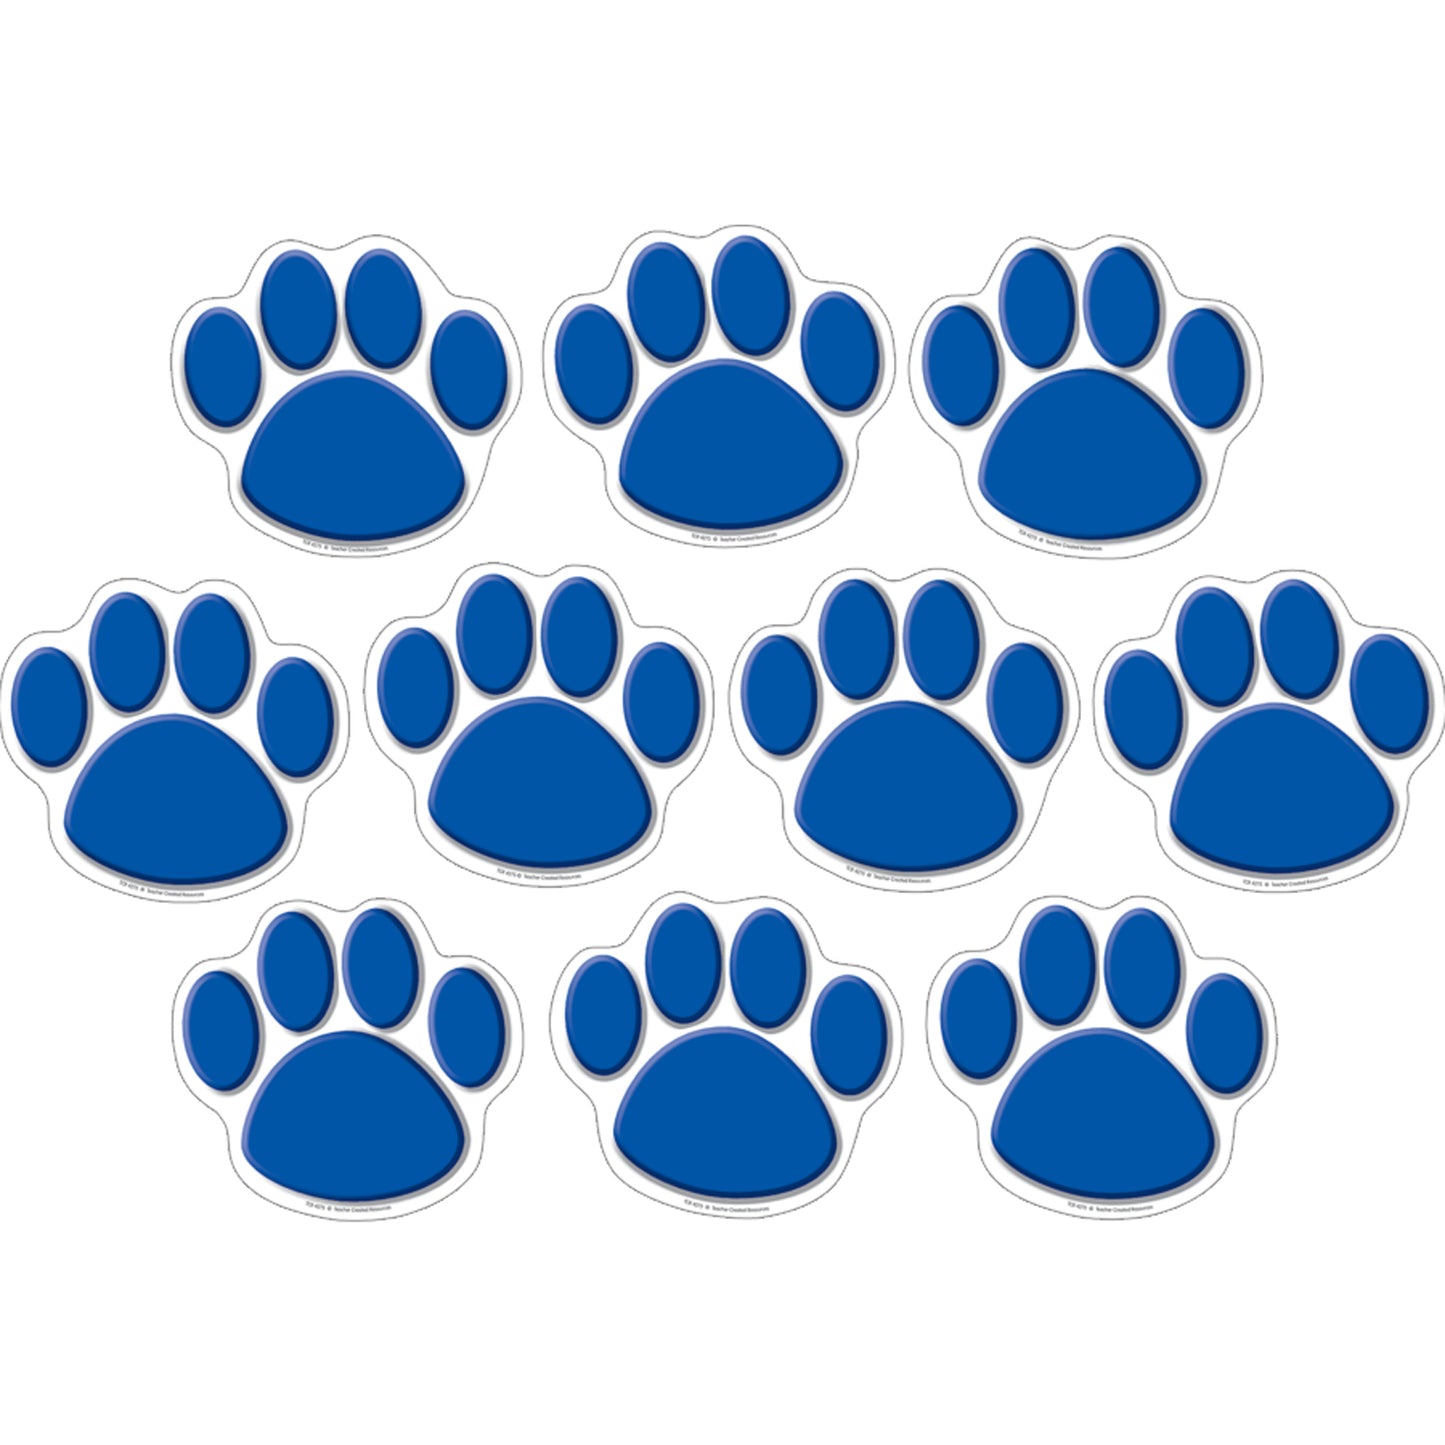 Blue Paw Prints Accents, 30 Per Pack, 3 Packs